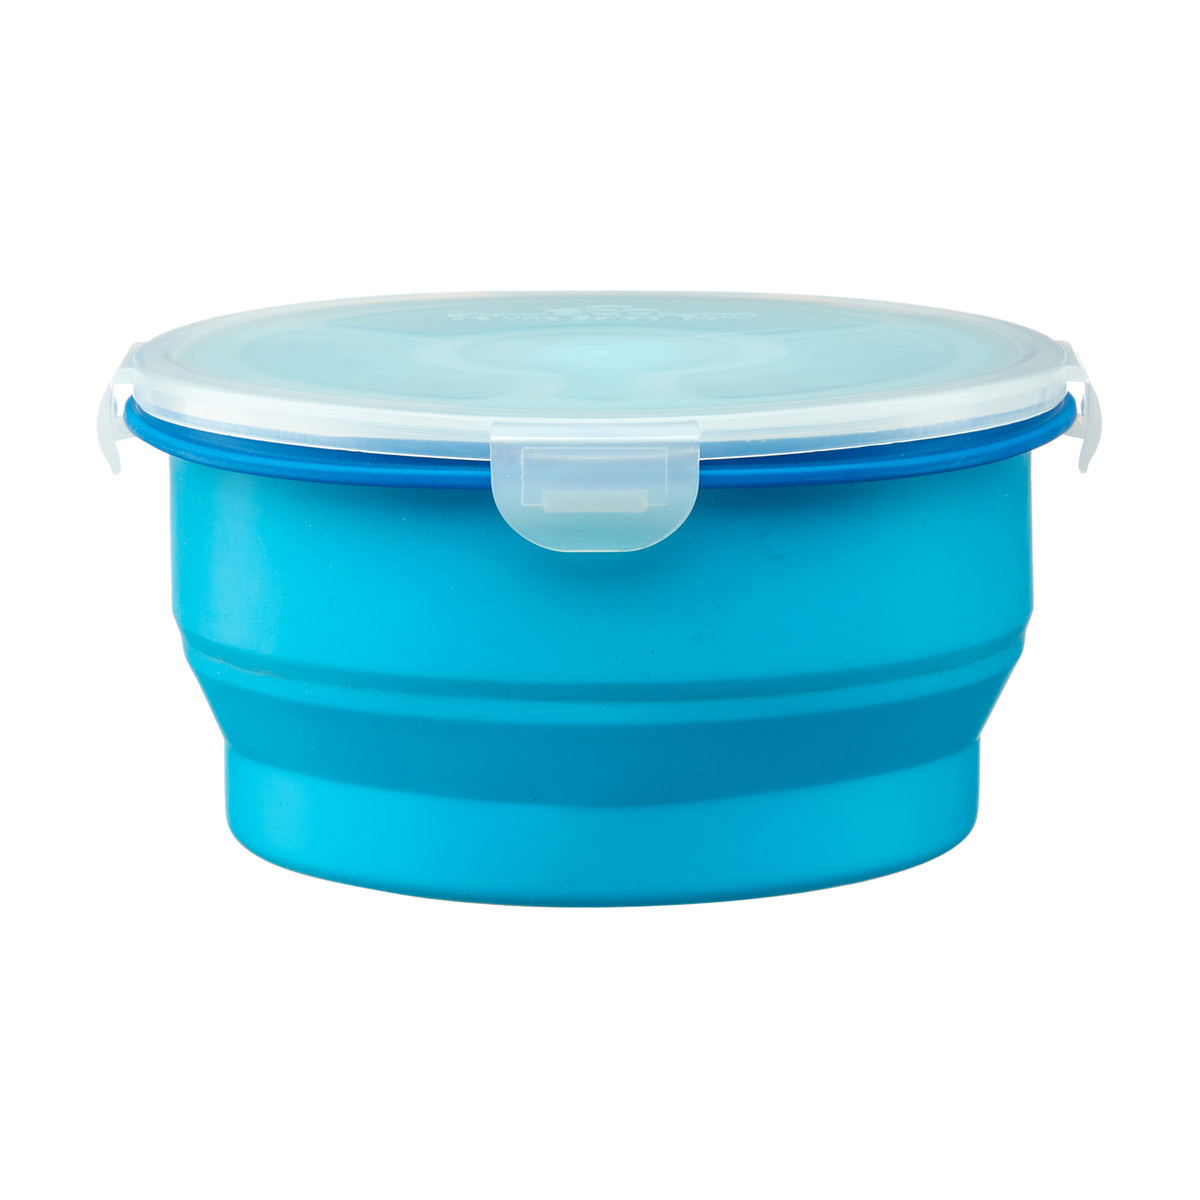 Smart Planet Eco Collapsible Deluxe Salad Bowl, Blue